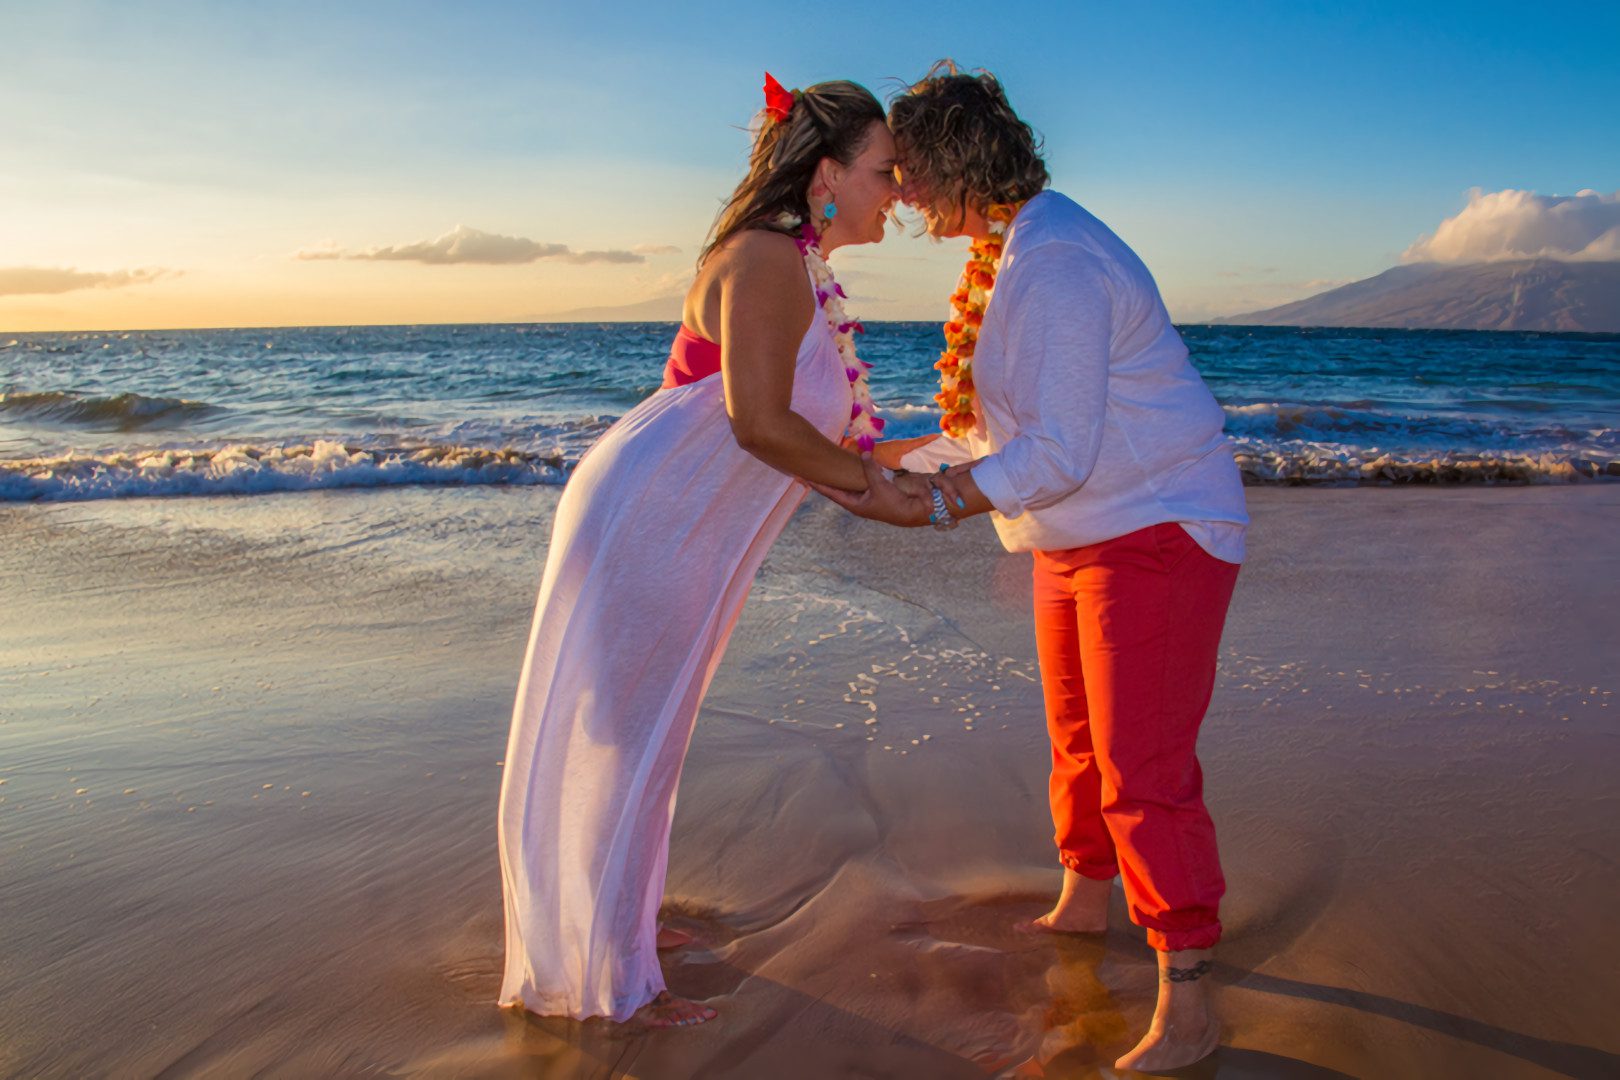 A wedding photography location in Maui